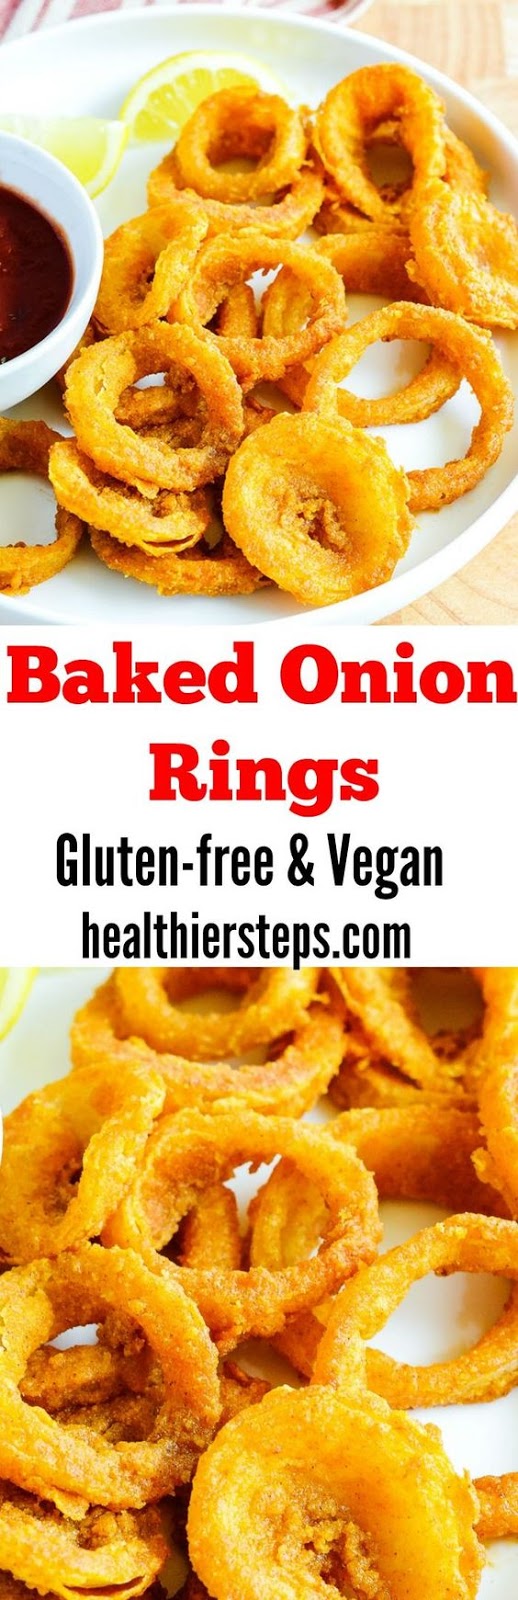 Baked Onion Rings Delicious, crispy and less greasy. Gluten-free and Vegan